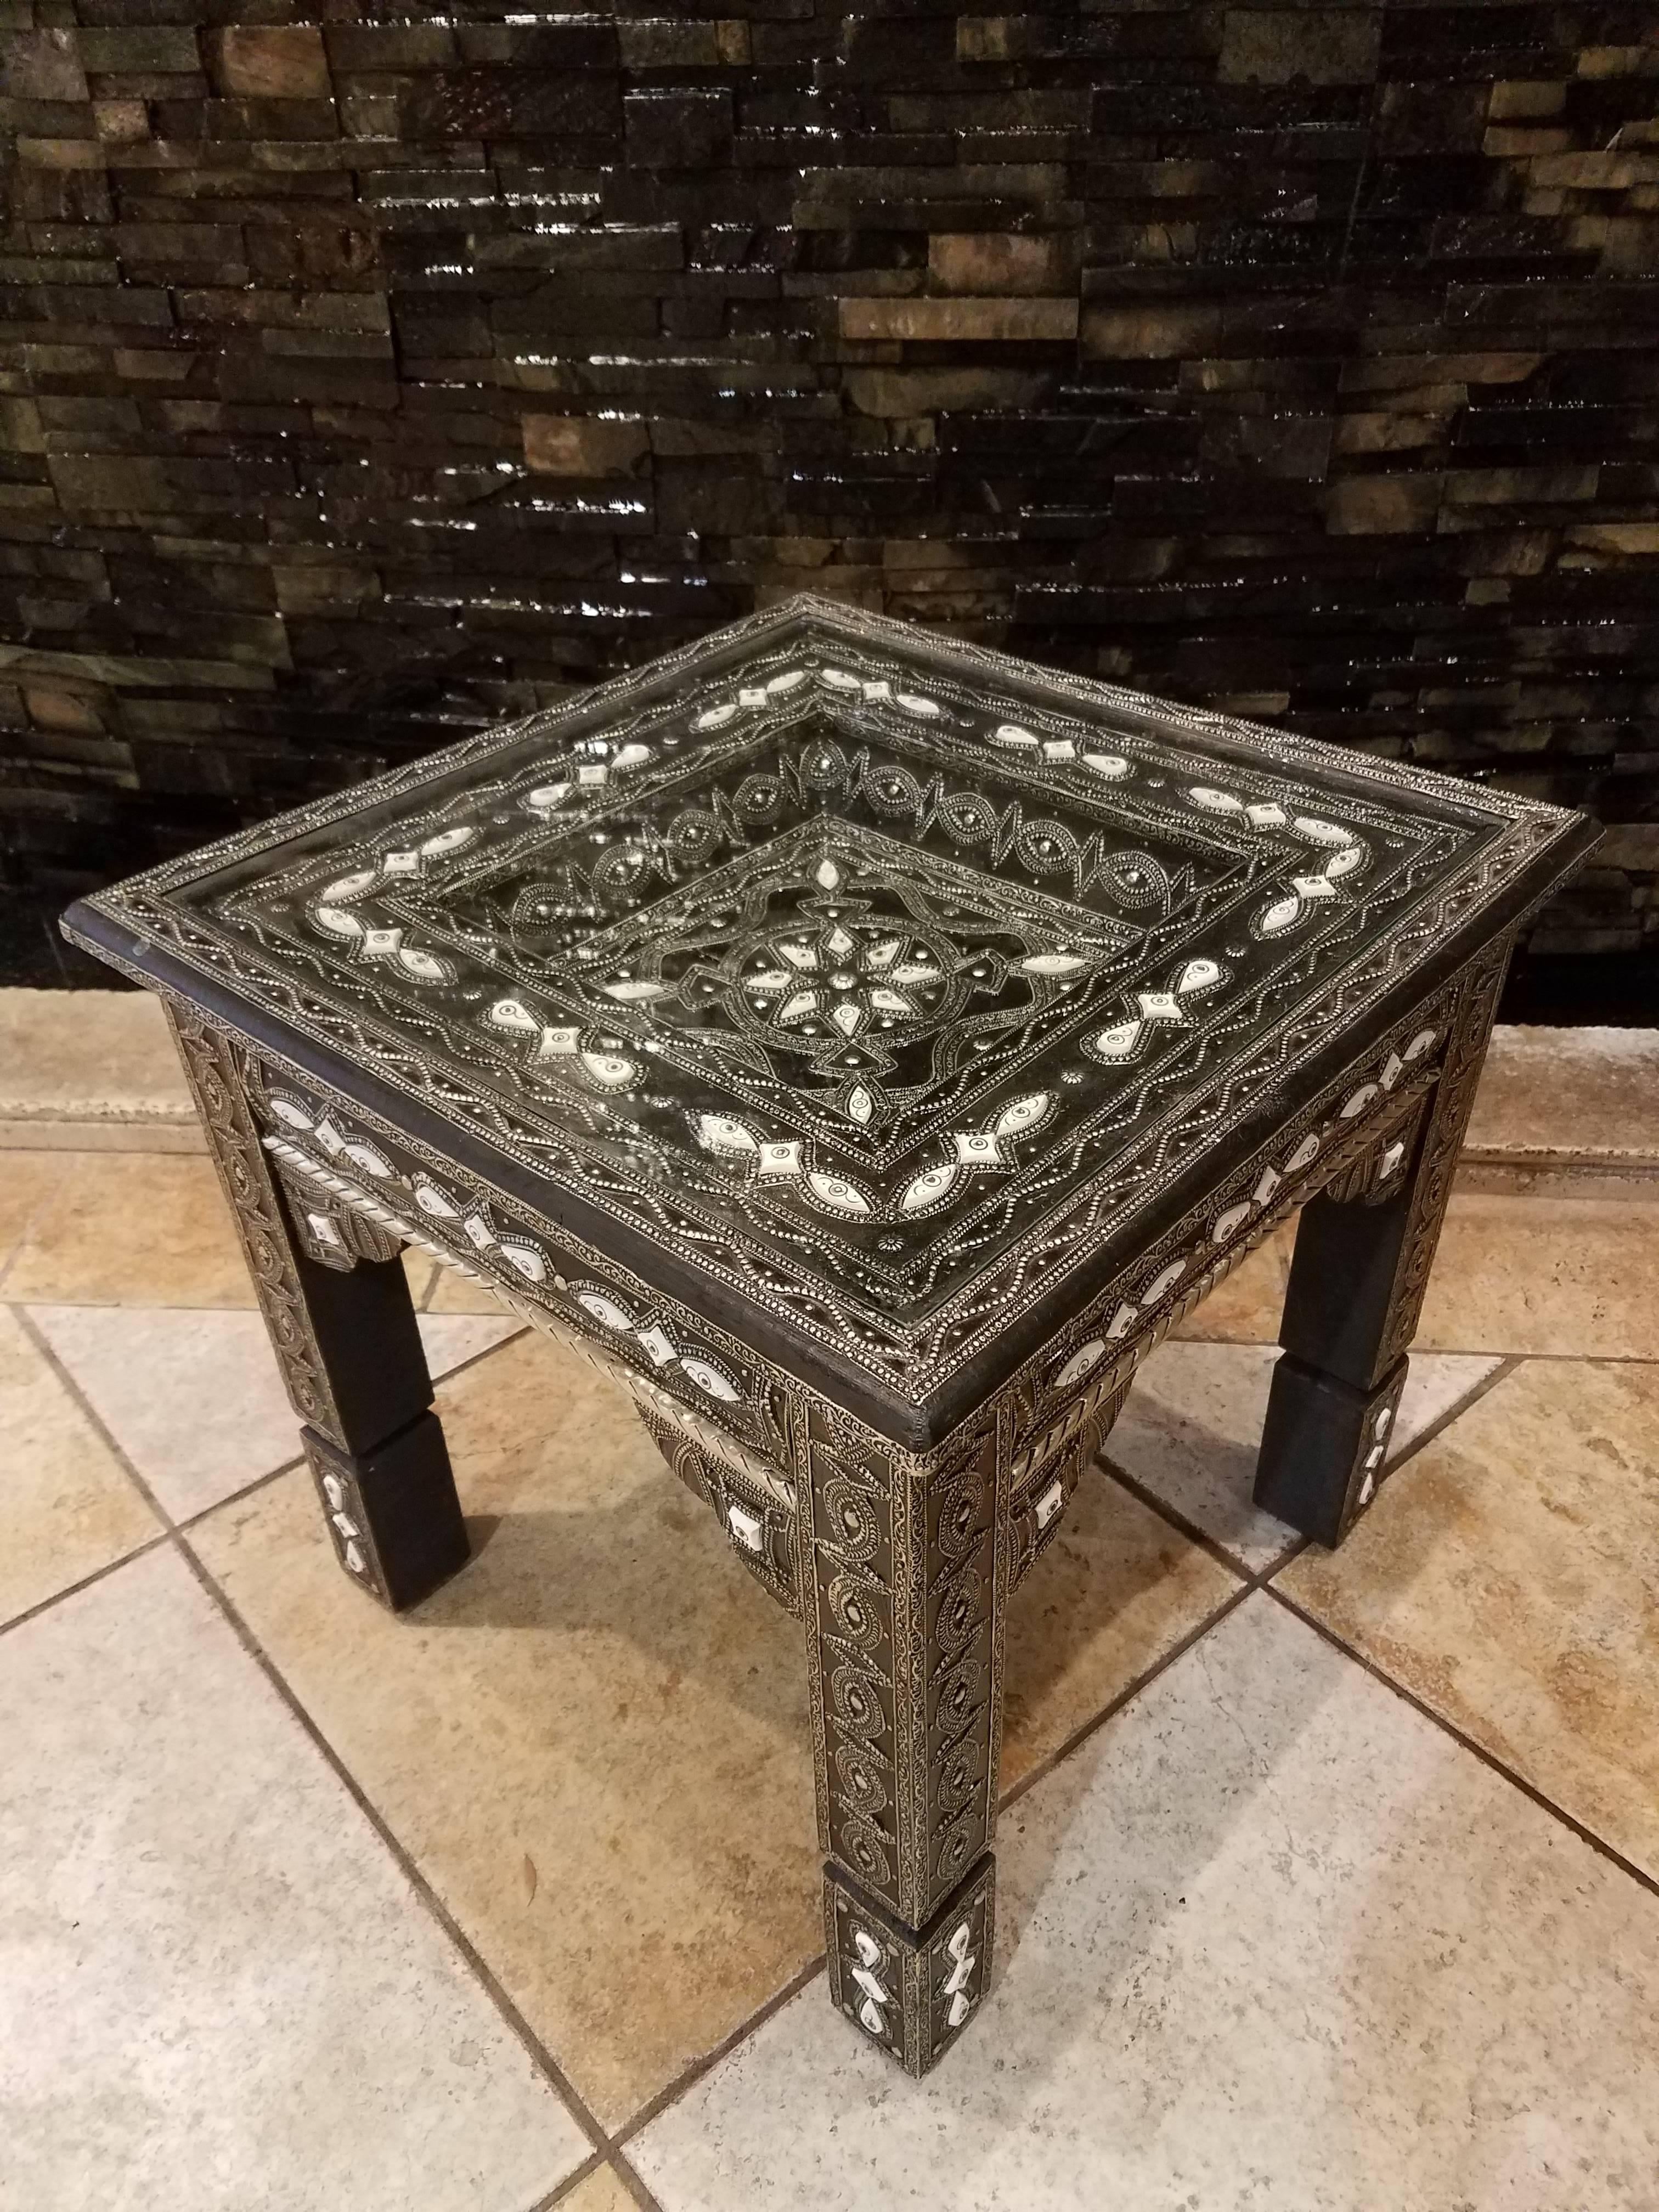 One of the best Moroccan side tables to ever make it to our warehouse. New square style inlaid with metal and camel bone. This table measures approximately 21″ from side to side and 20″ in height. Weighs about 25 lbs. Very intricate as you can see